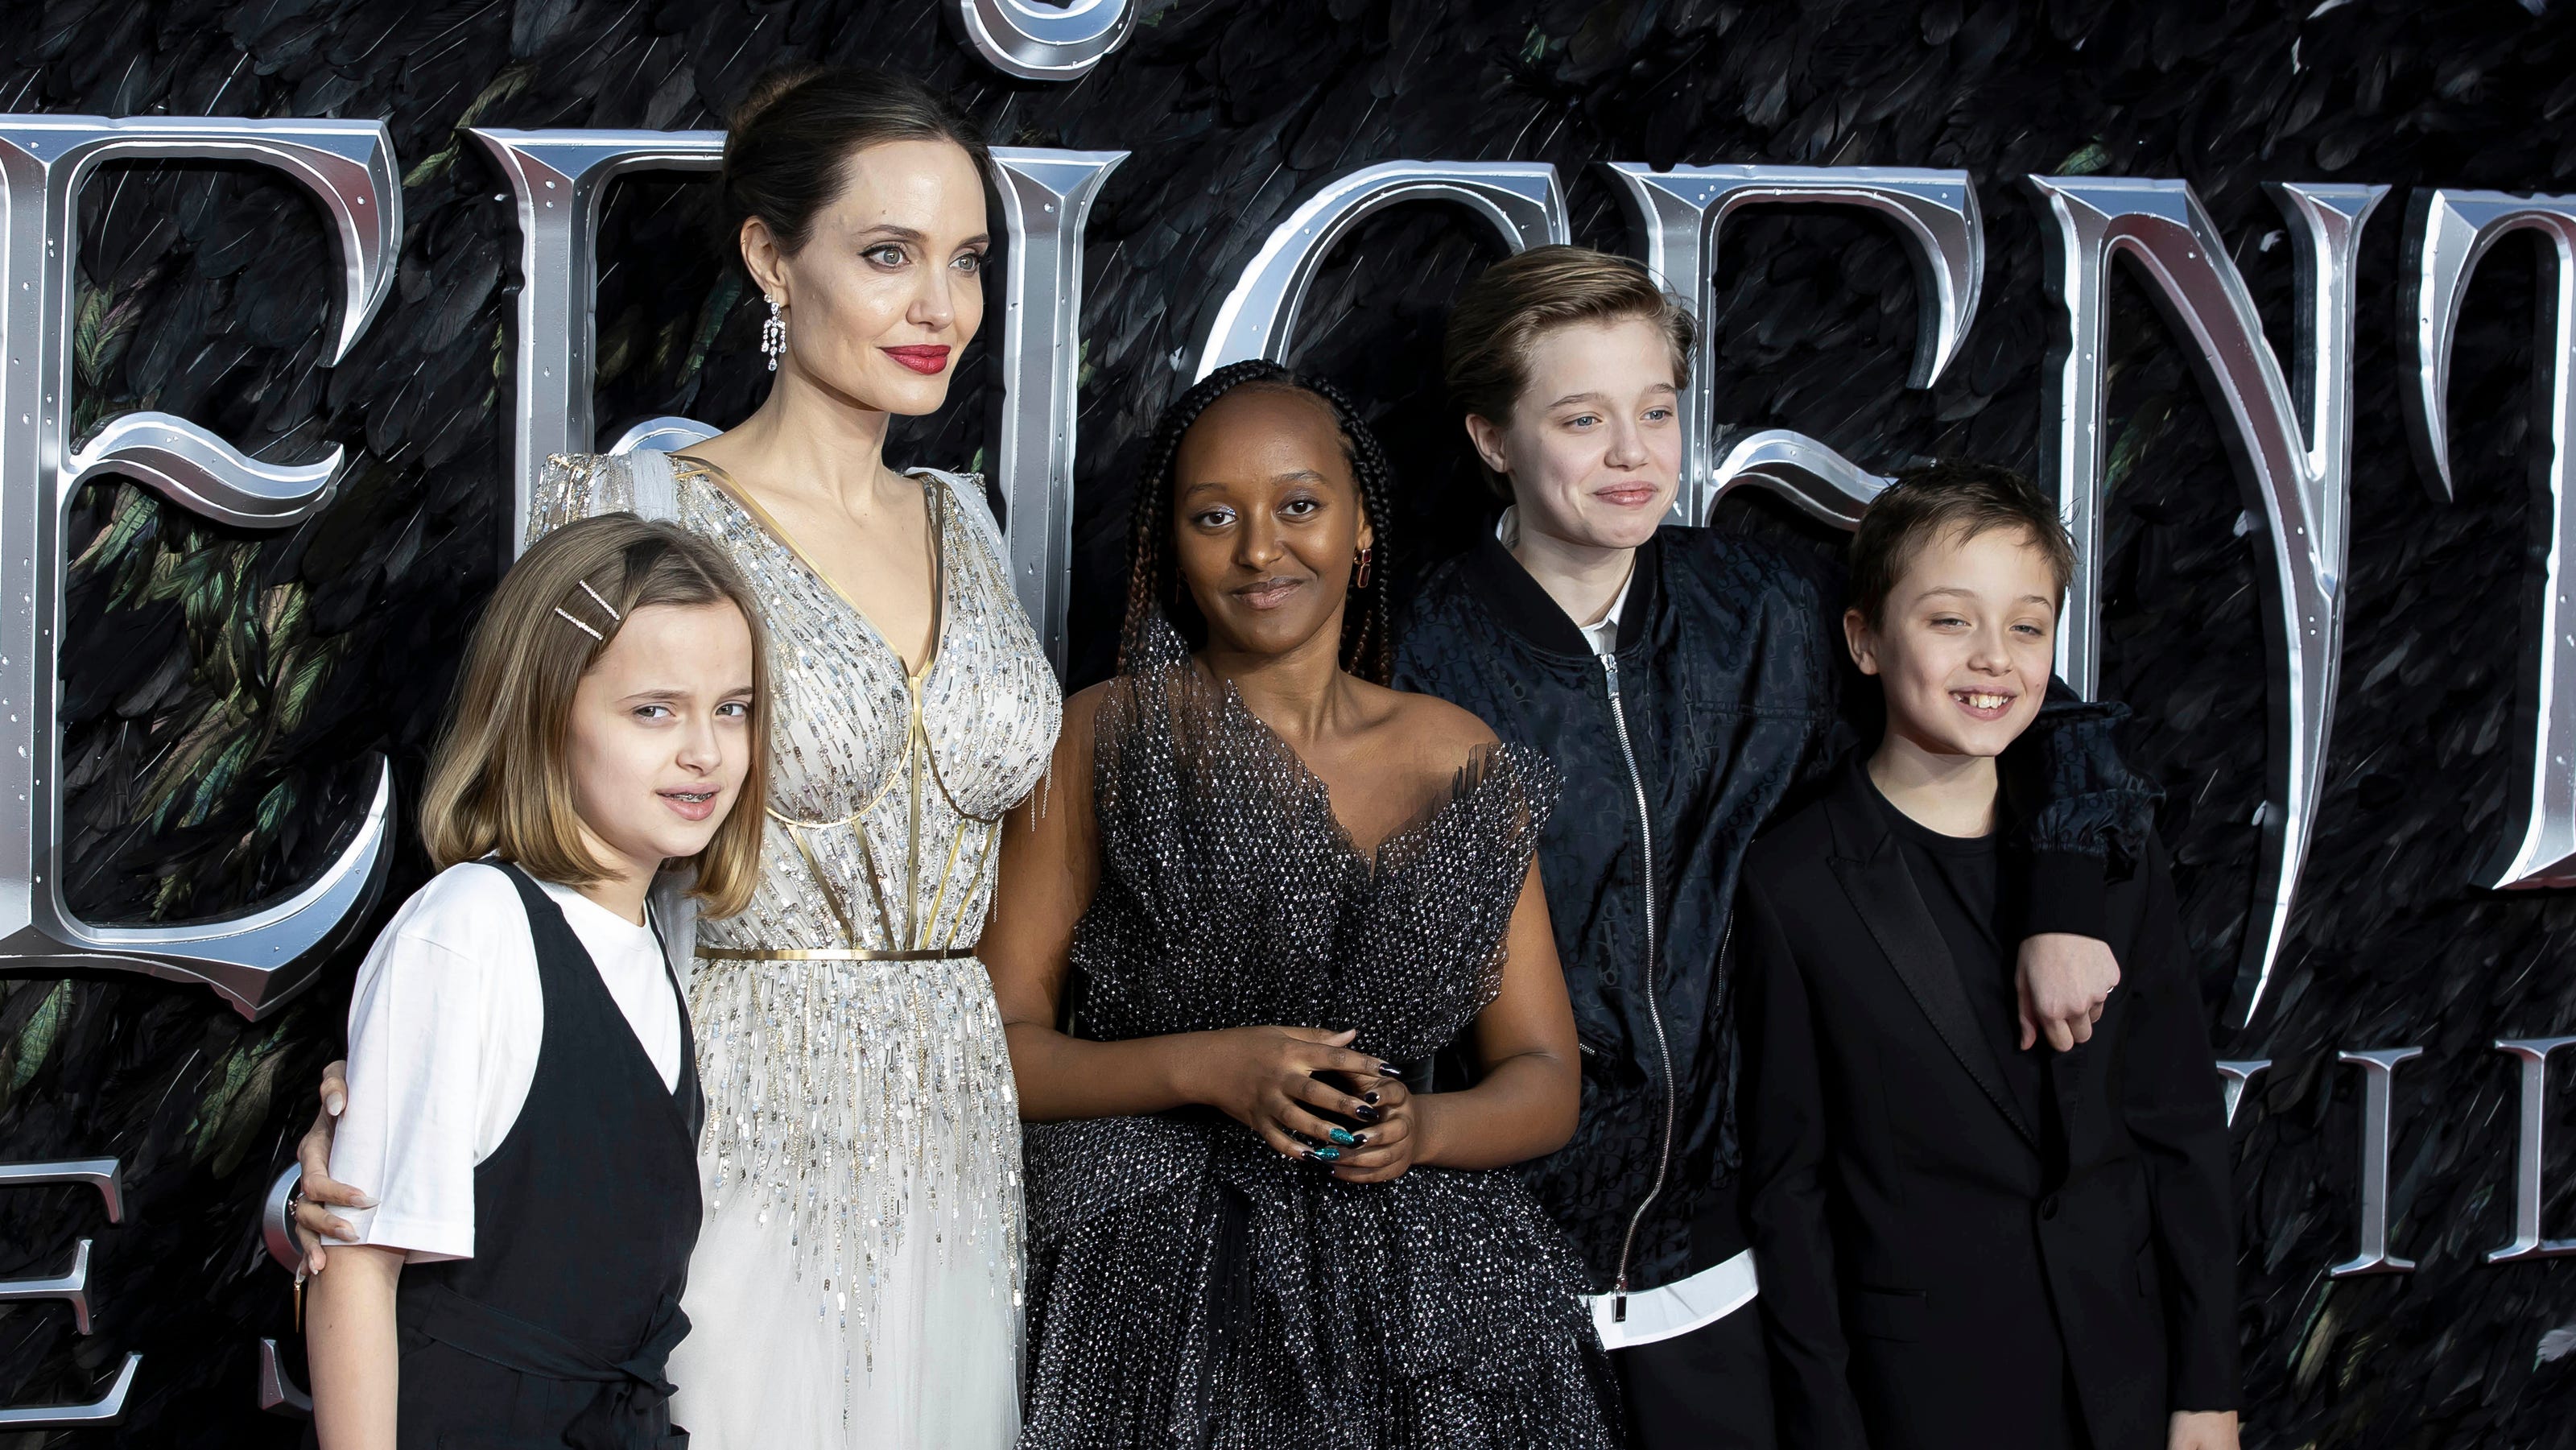 Angelina Jolie learns from her kids, who have 'been through a lot'